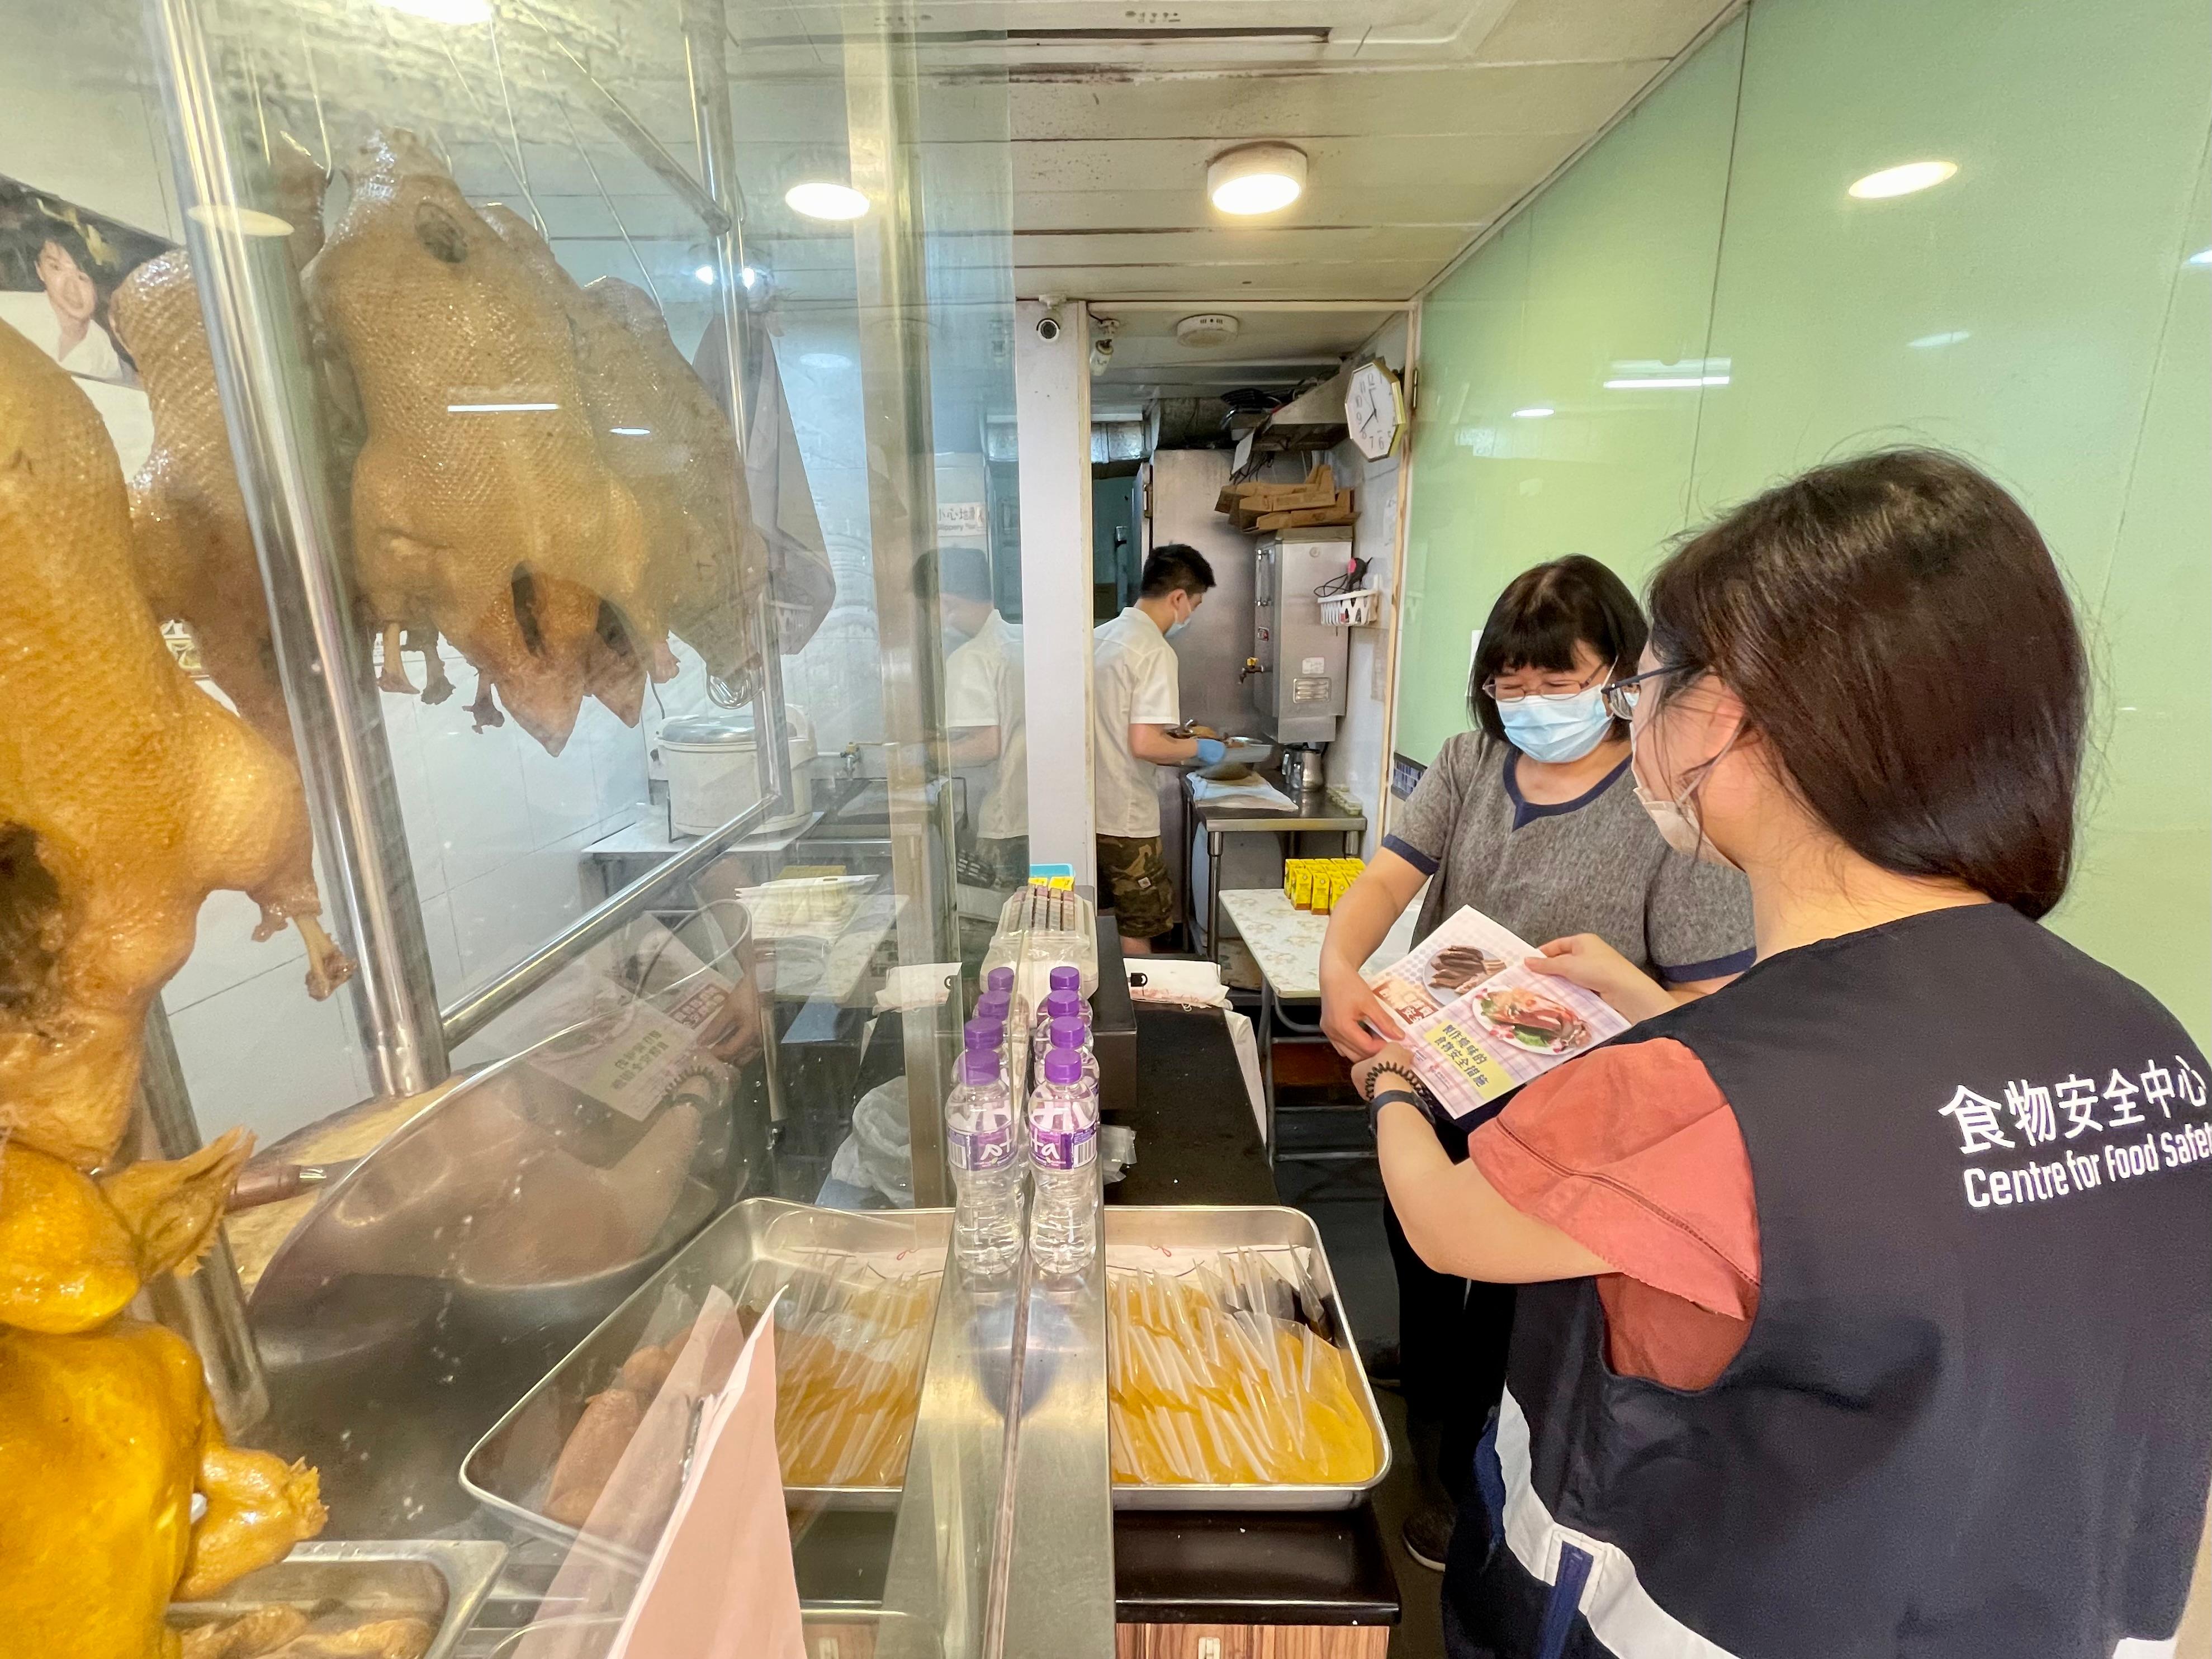 The Centre for Food Safety (CFS) of the Food and Environmental Hygiene Department today (May 30) reminded members of the public and food businesses to pay special attention to food safety during the summer. Photo shows a CFS staff member distributing leaflets on food safety.